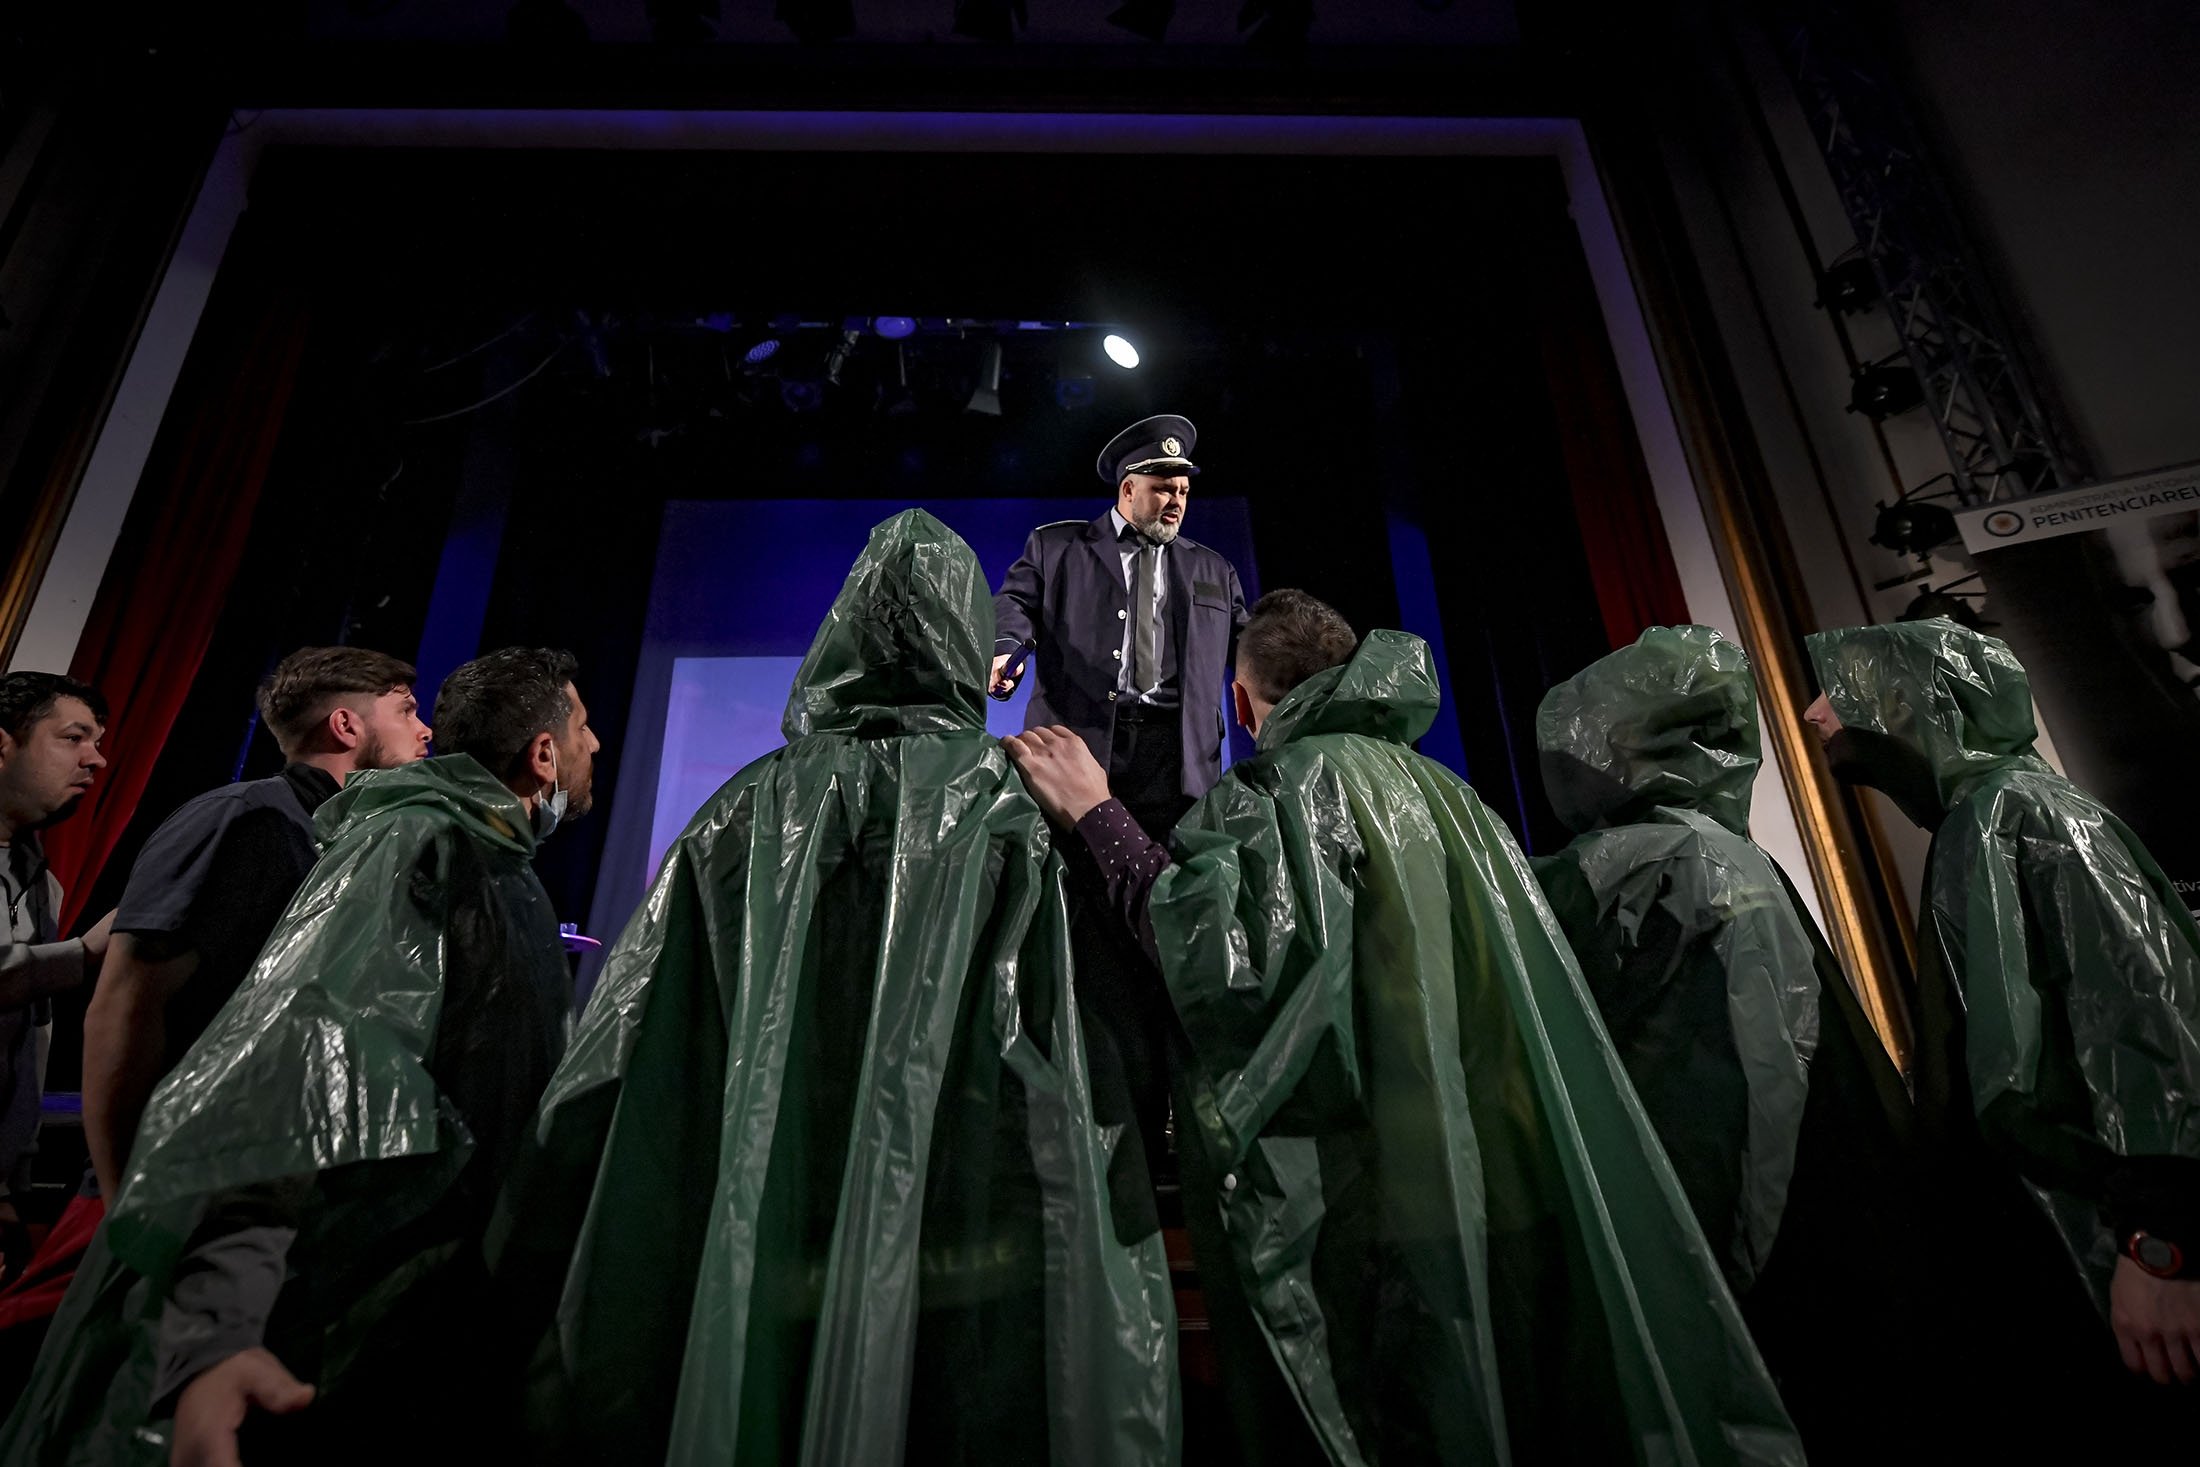 Inmates perform in the “State of Siege,” by French author Albert Camus, a play describing a totalitarian Spanish regime during the plague, at the Nottara Theater in Bucharest, Romania, Nov. 24, 2021. (AP Photo)